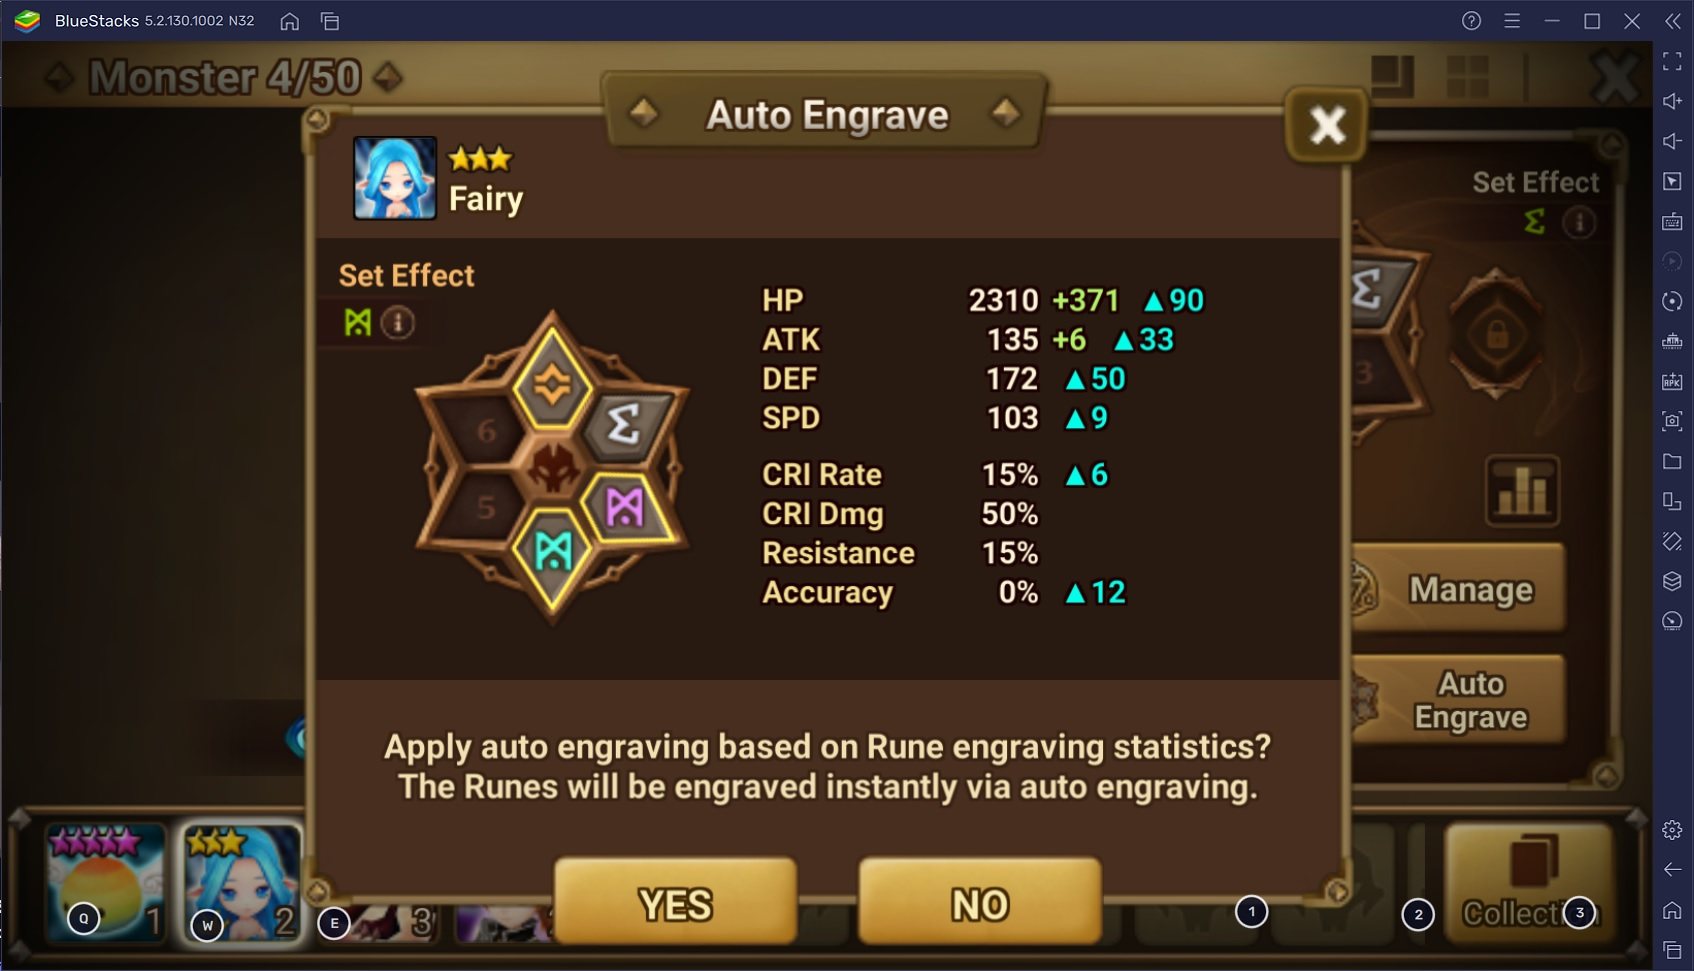 Summoners War Version 6.5.0 is Adding a New Feature to the Rune System